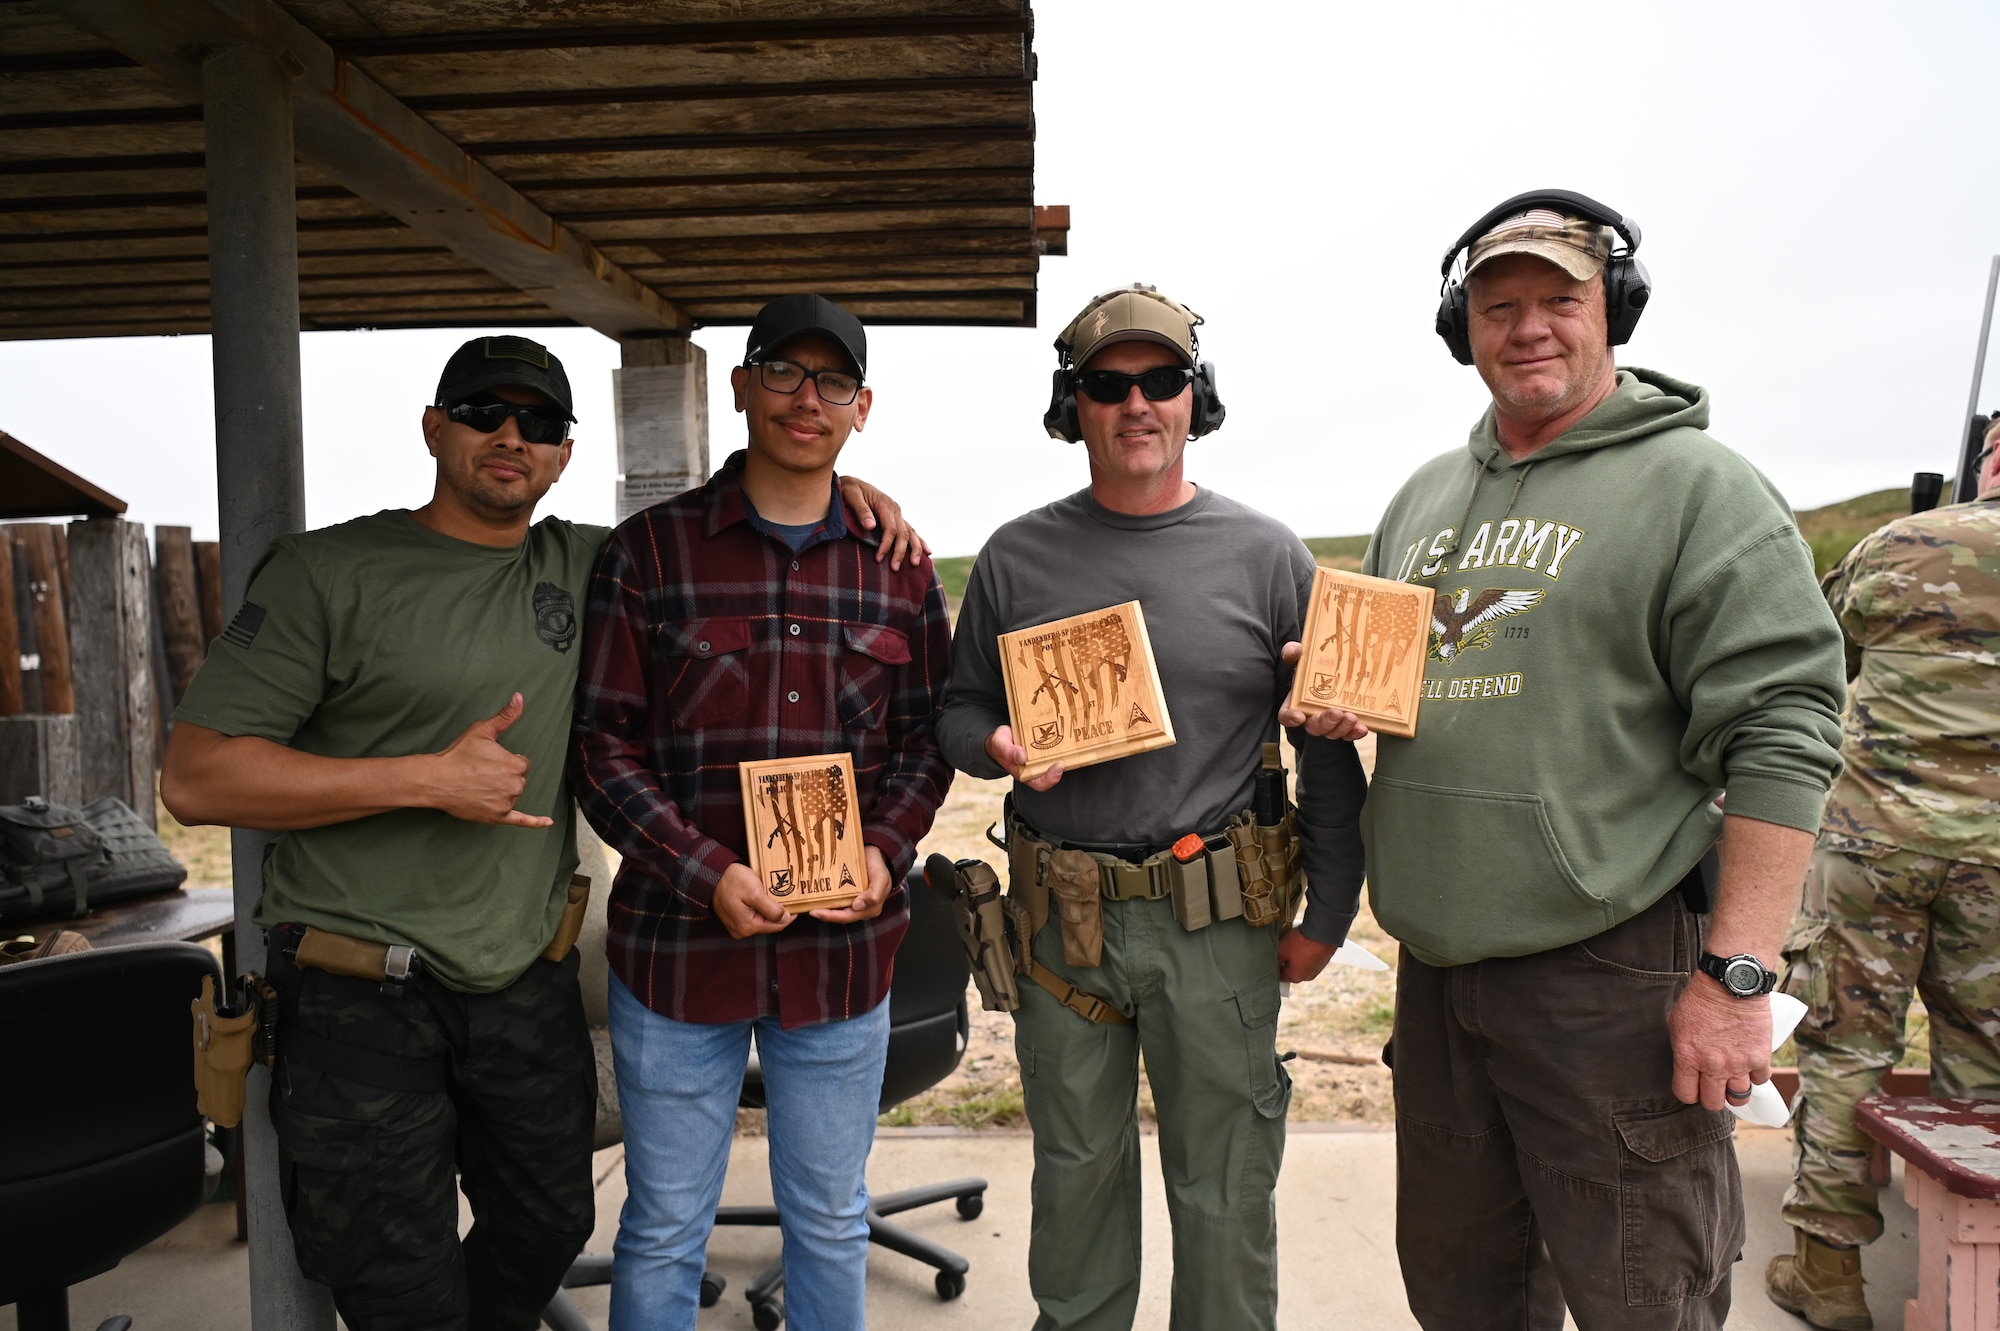 The winners of the Vandenberg Rod and Gun Club shooting competition pose with their plaques at Vandenberg Space Force Base, Calif., May 17, 2023. National Police Week offers honor, remembrance, and peer support, while allowing law enforcement, survivors, and citizens to gather and pay homage to those who gave their lives in the line of duty. (U.S. Space Force photo by Senior Airman Tiarra Sibley)